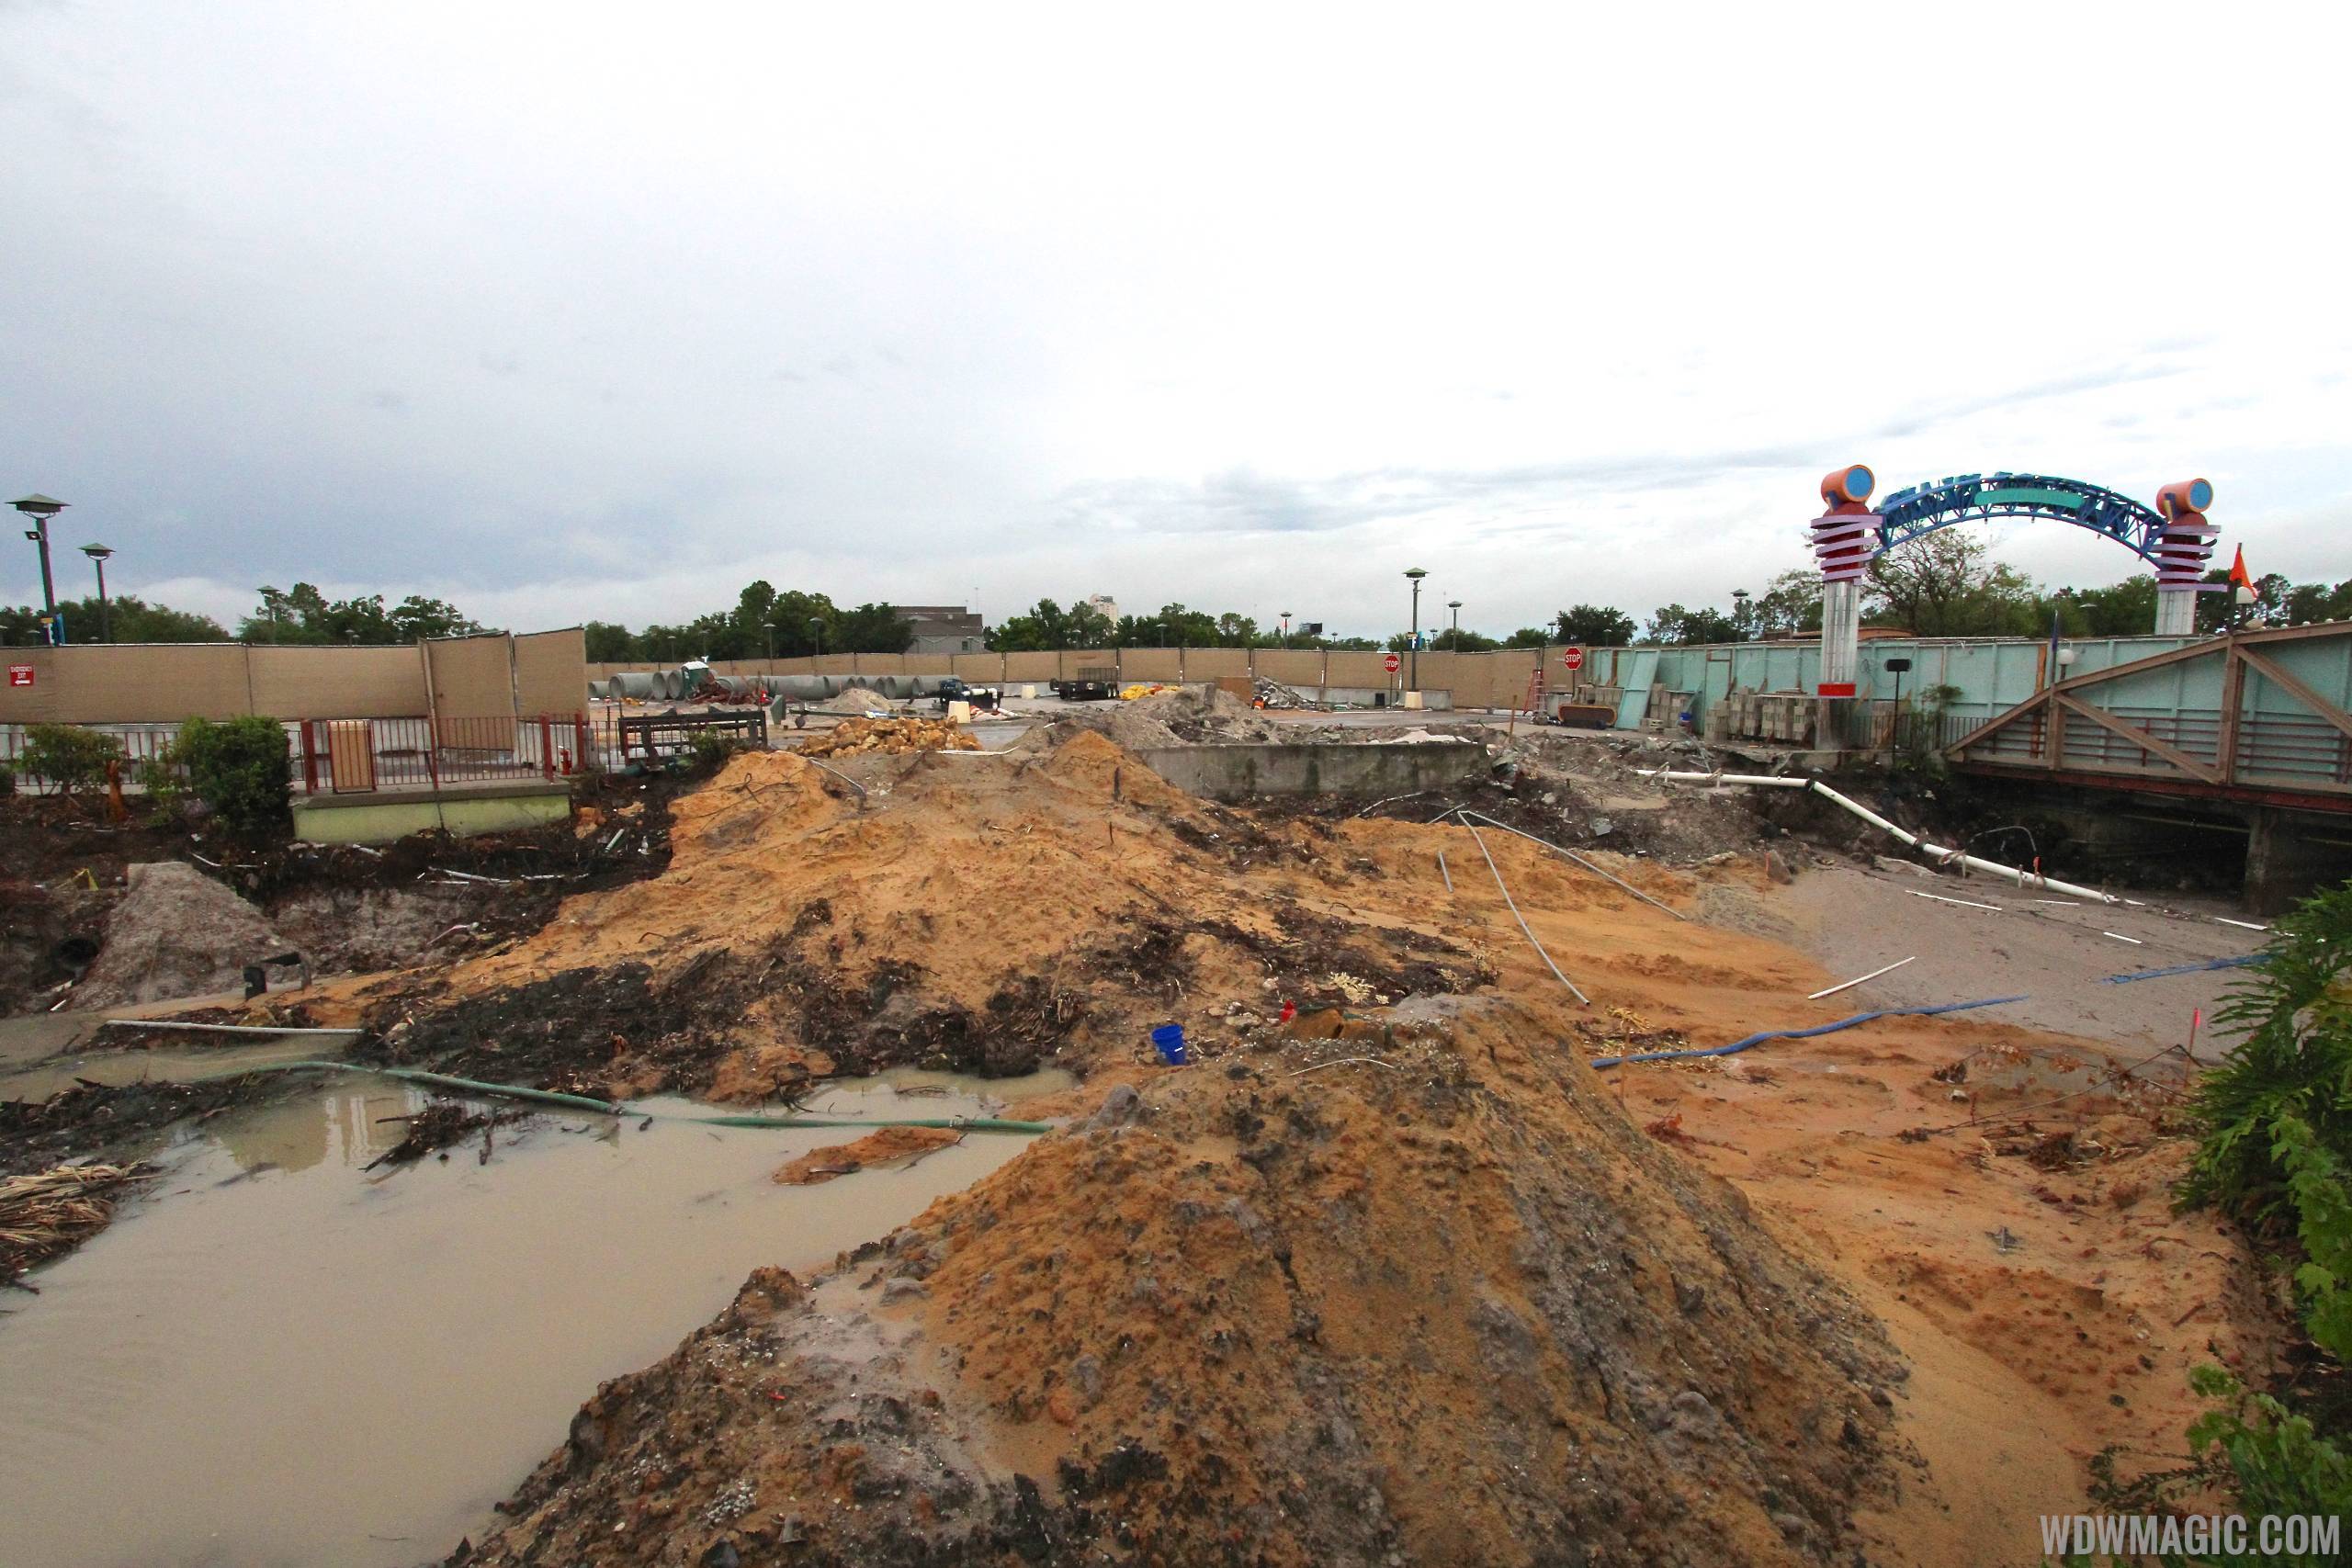 PHOTOS - Waterway removal now underway at the former Pleasure Island area